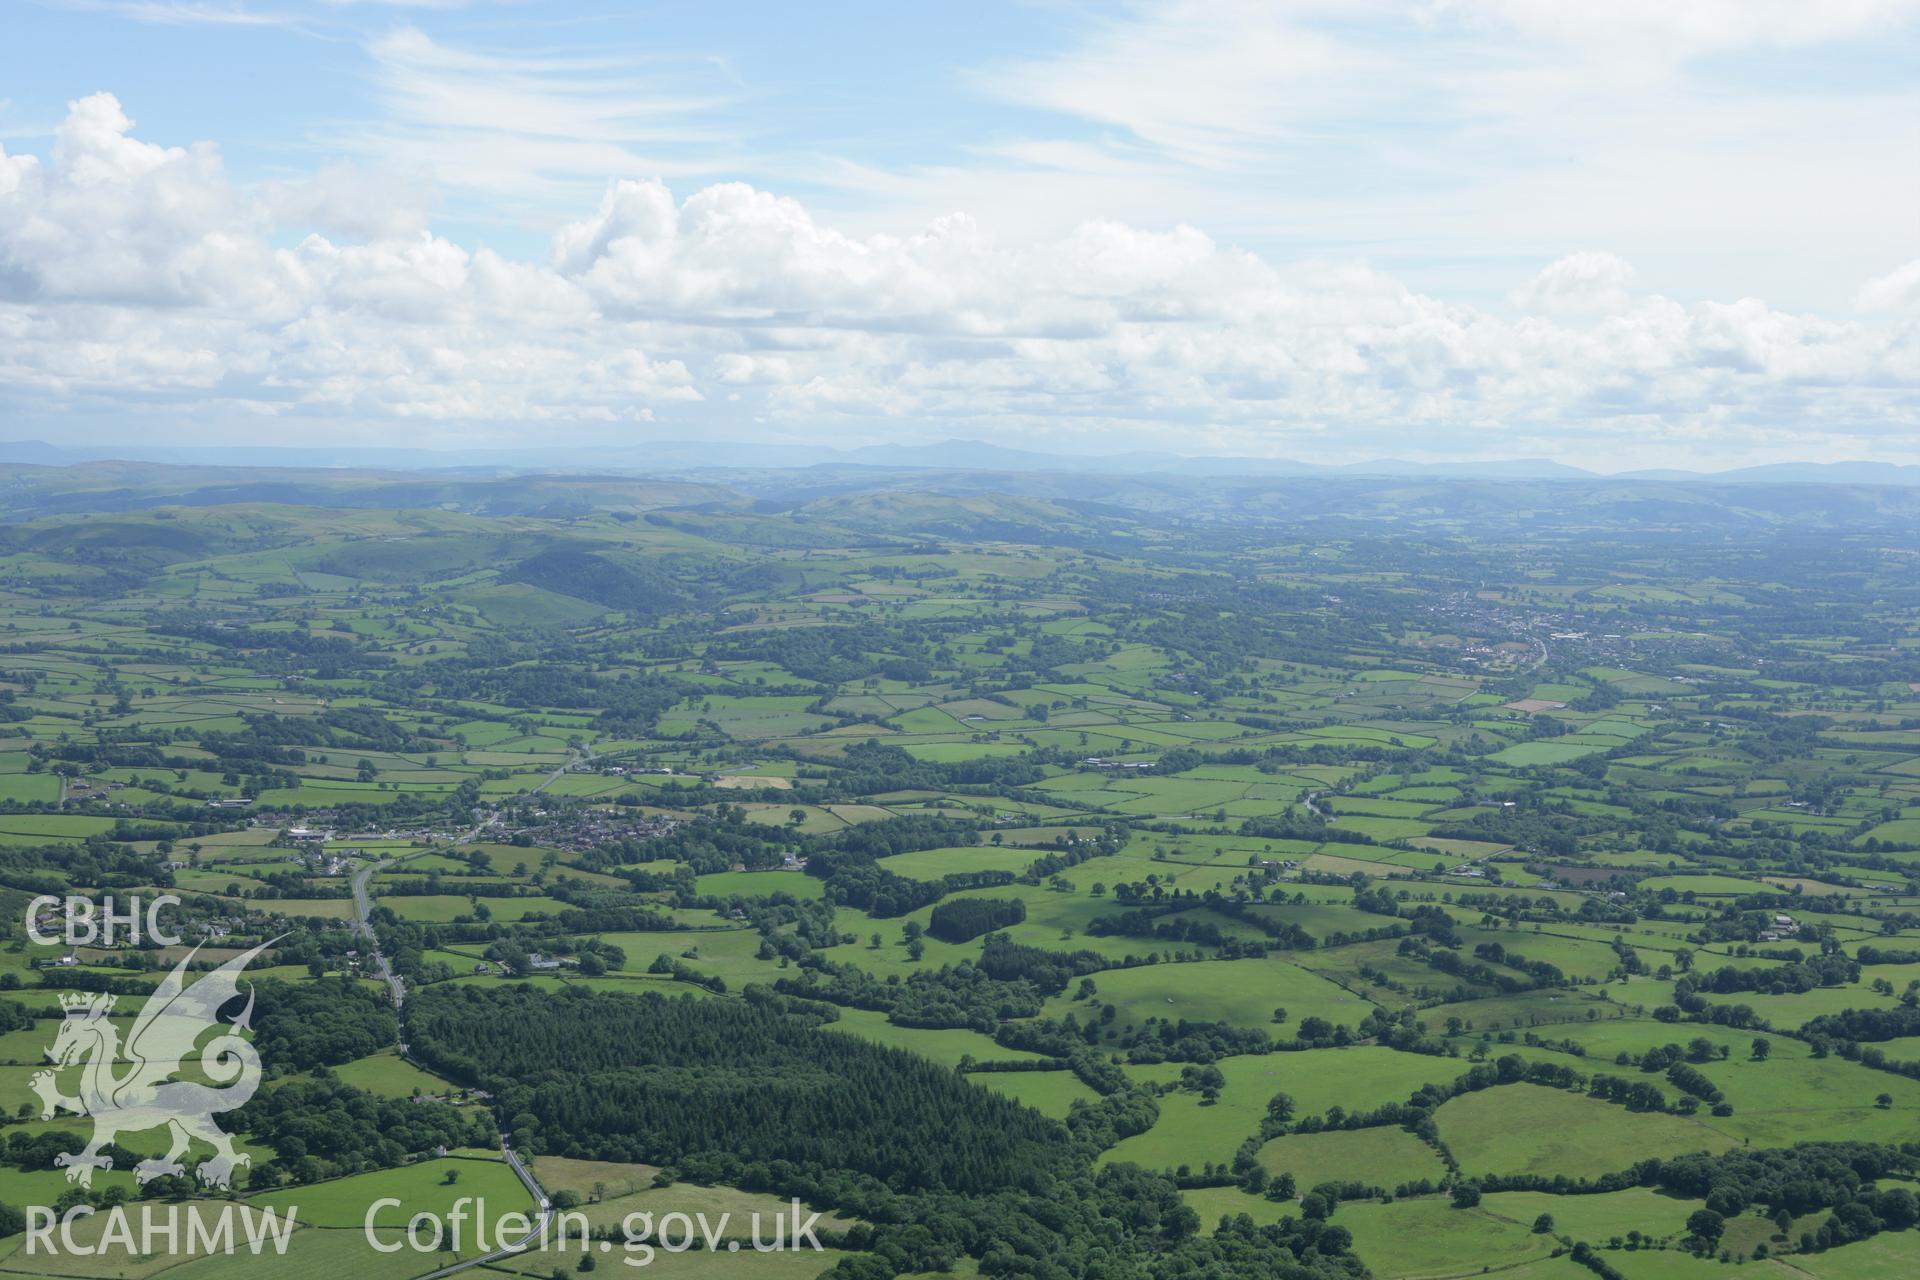 RCAHMW colour oblique aerial photograph showing landscape to the south from Crossgates to Llandrindod Wells. Taken on 09 July 2007 by Toby Driver